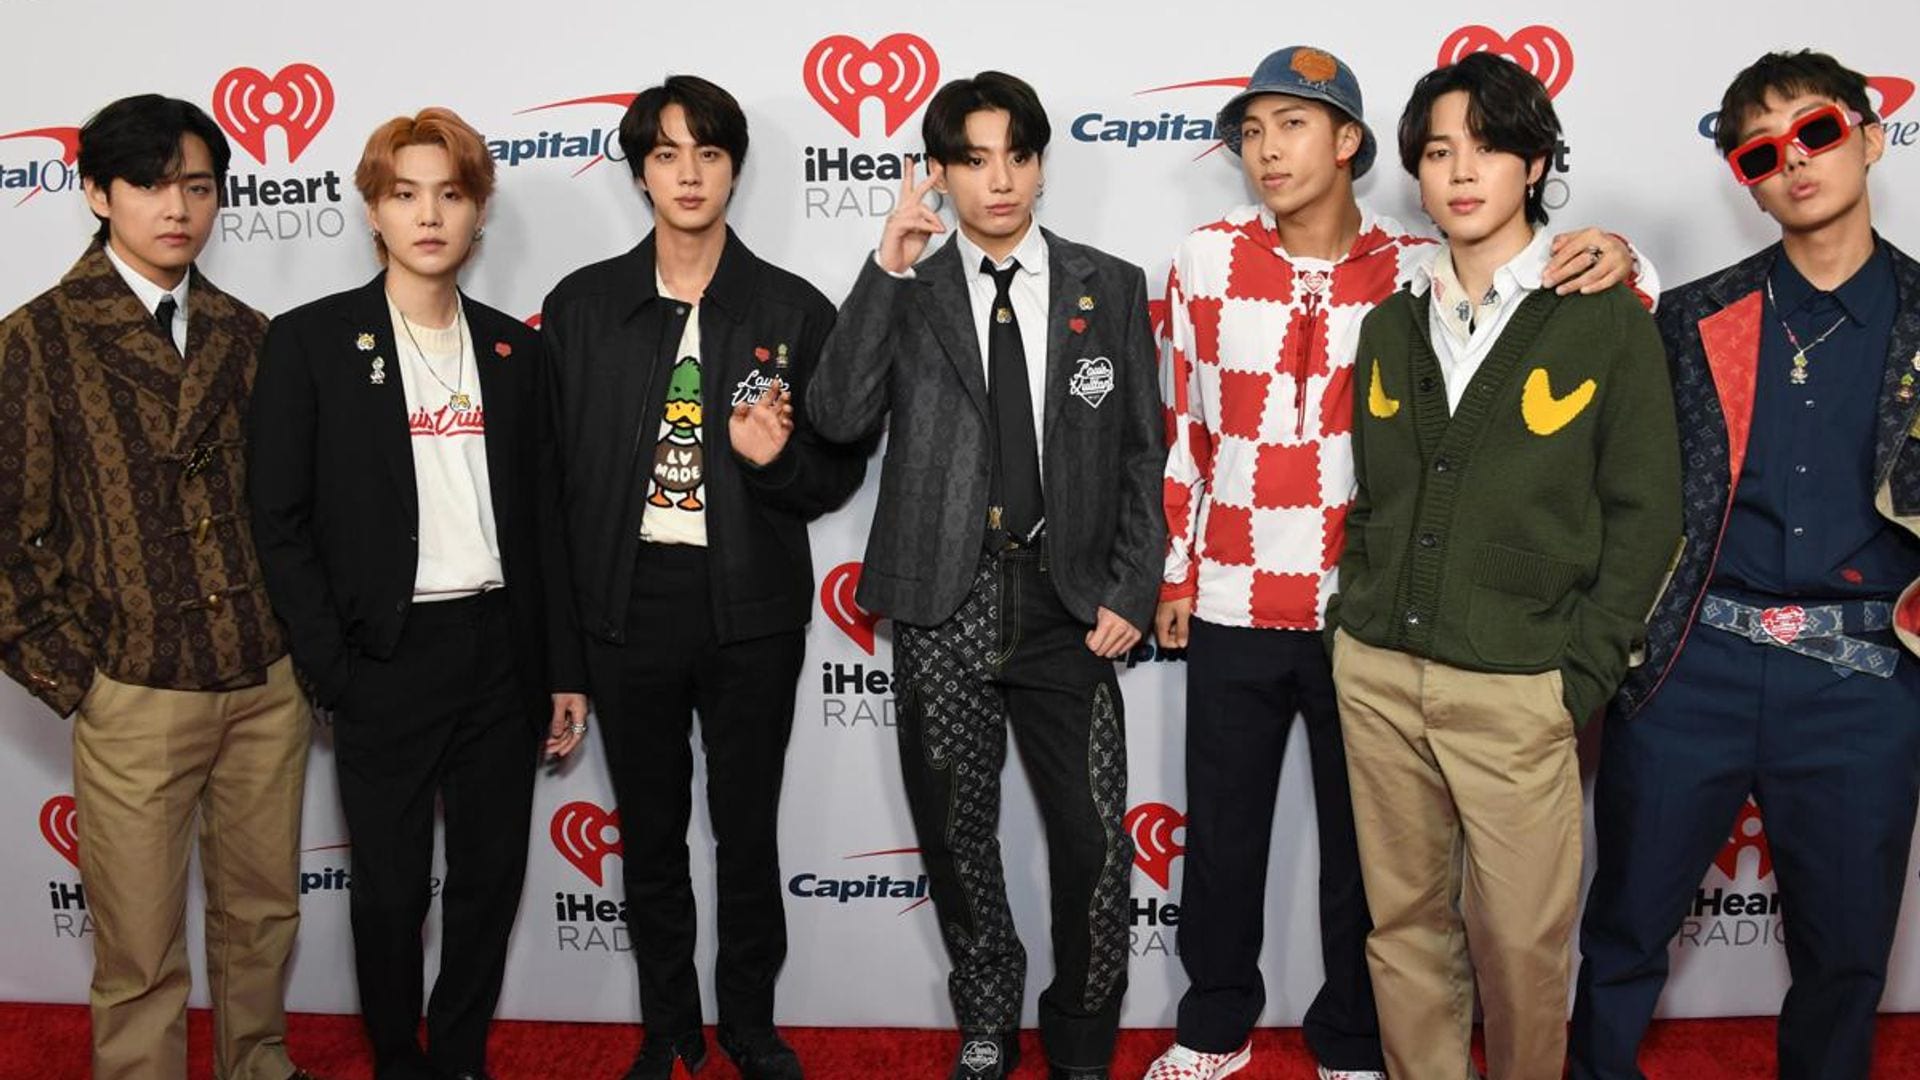 BTS beats out Taylor Swift and Drake with this decade’s most Billboard hits